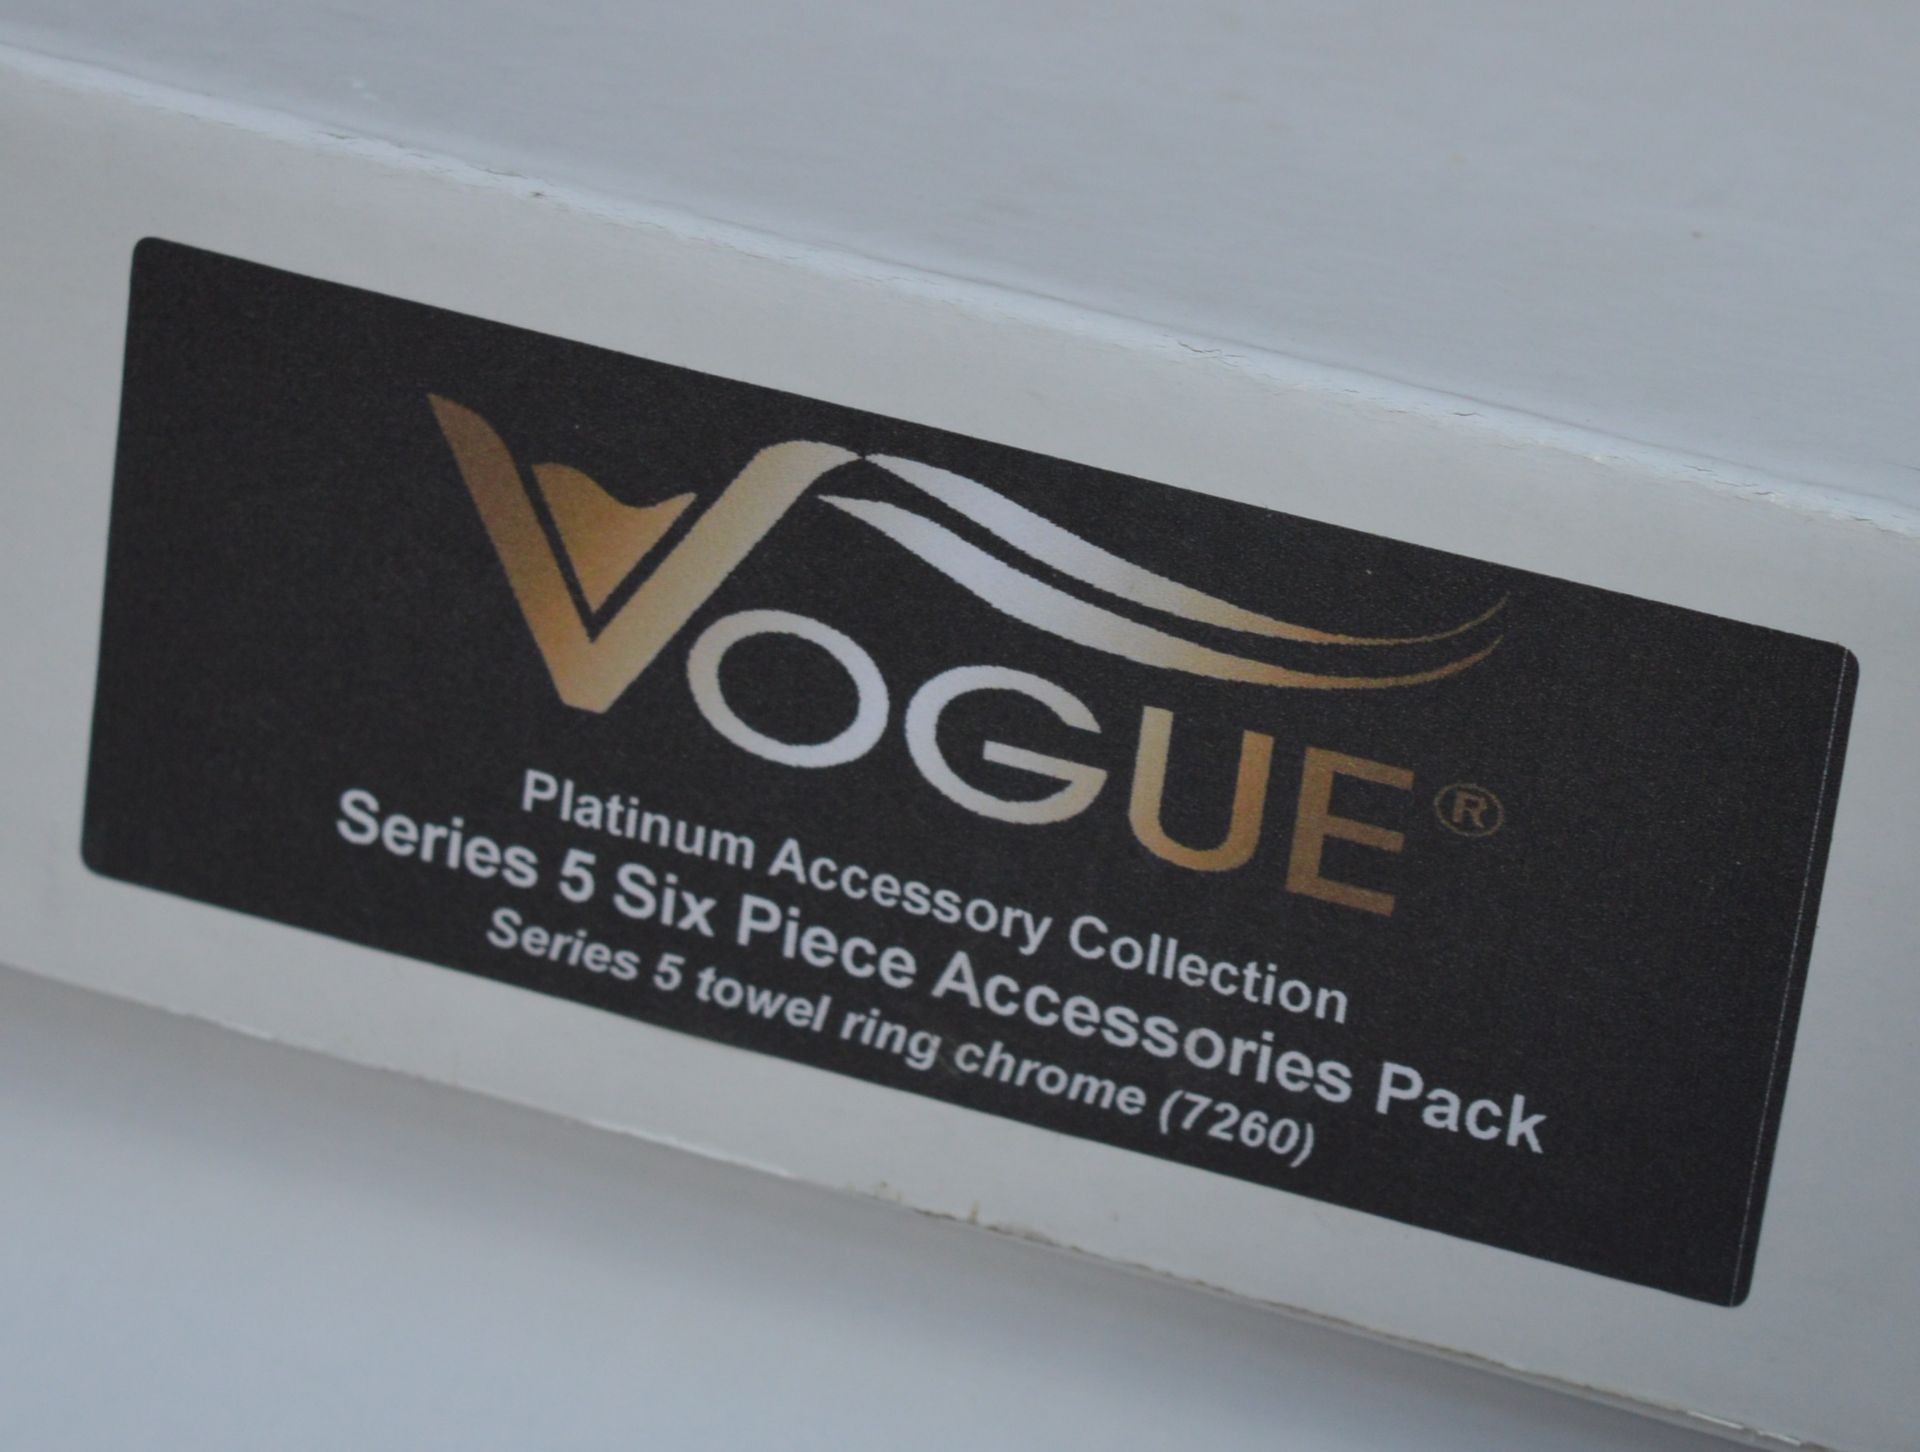 1 x Vogue Series 5 Six Piece Bathroom Accessory Set - Includes WC Roll Holder, Soap Dispenser, - Image 3 of 11